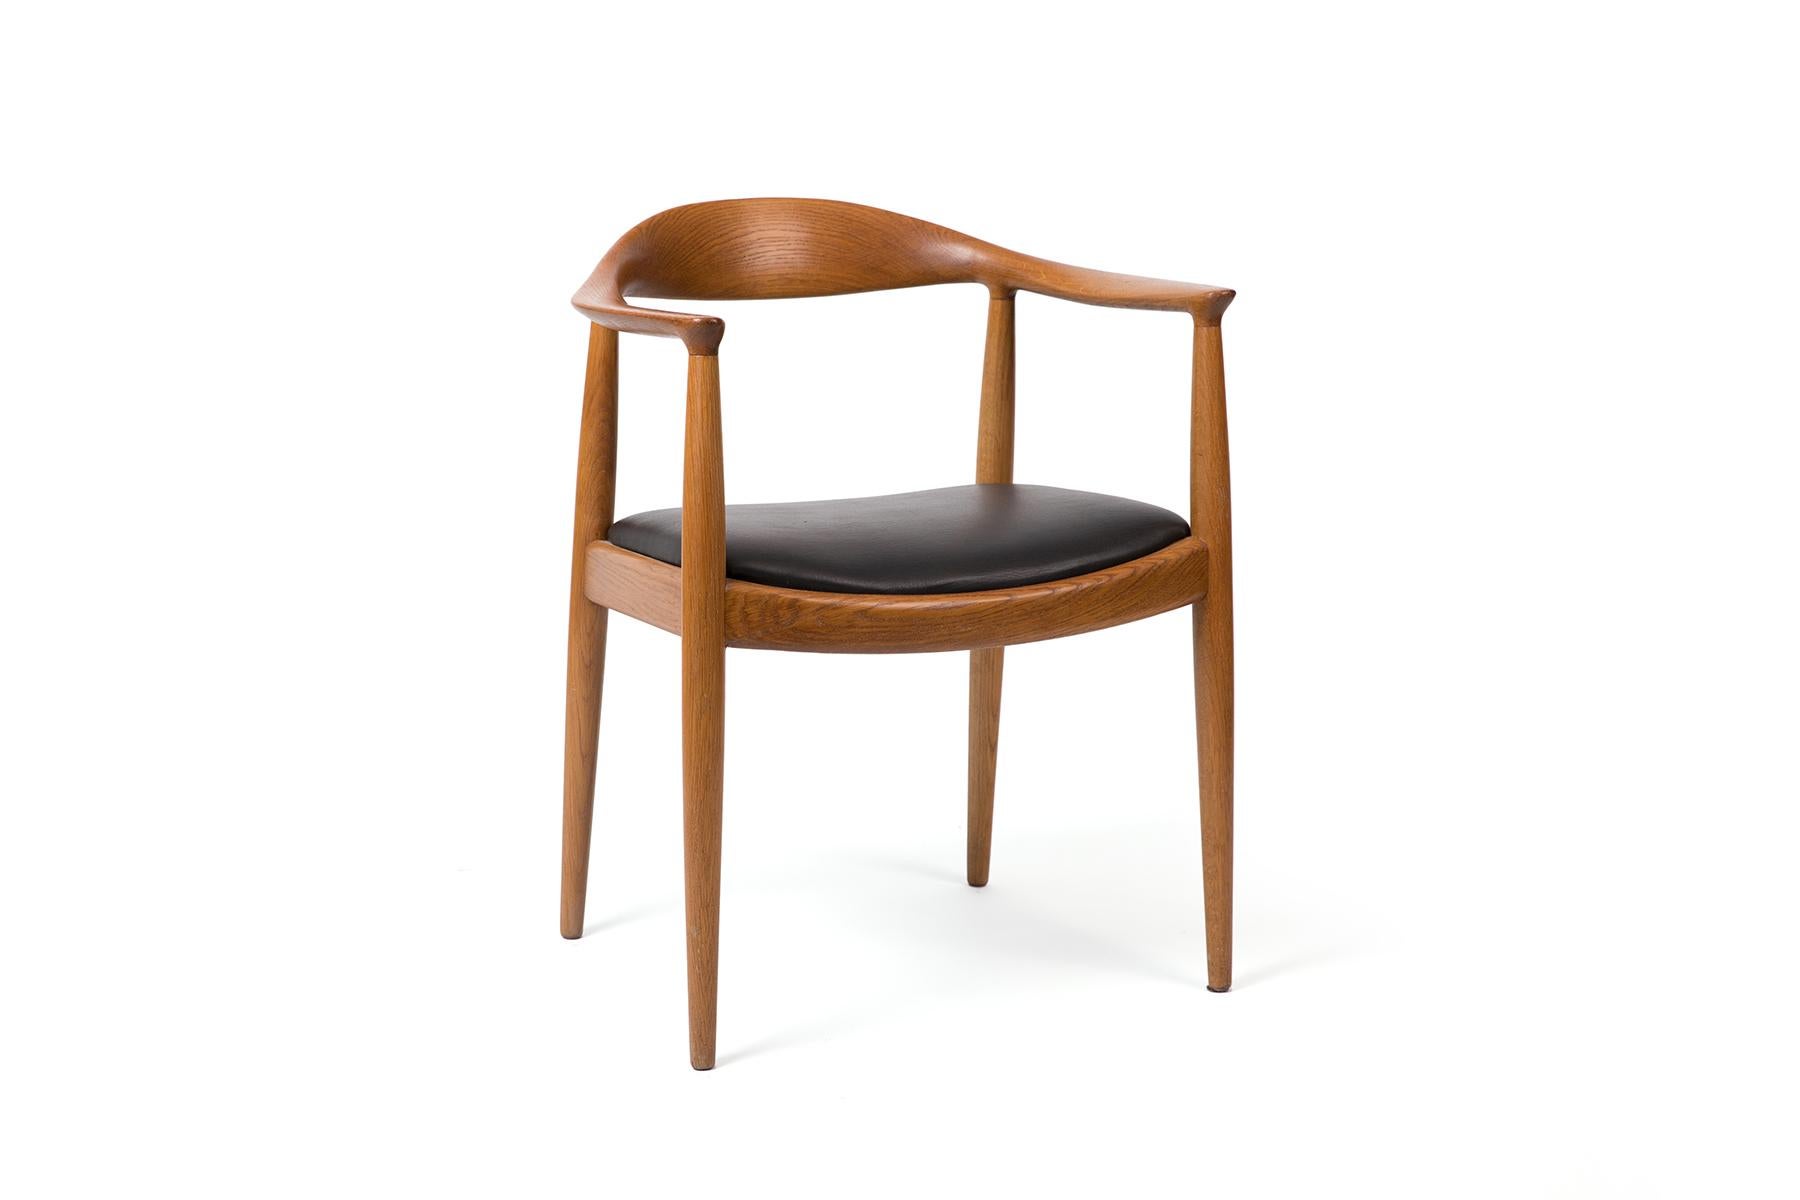 Known as the iconic “Round Chair,” this armchair was designed by Hans Wegner in 1949. The chairs have deep oak frames with black leather seats and bear the Johannes Hansen stamp. Four available.